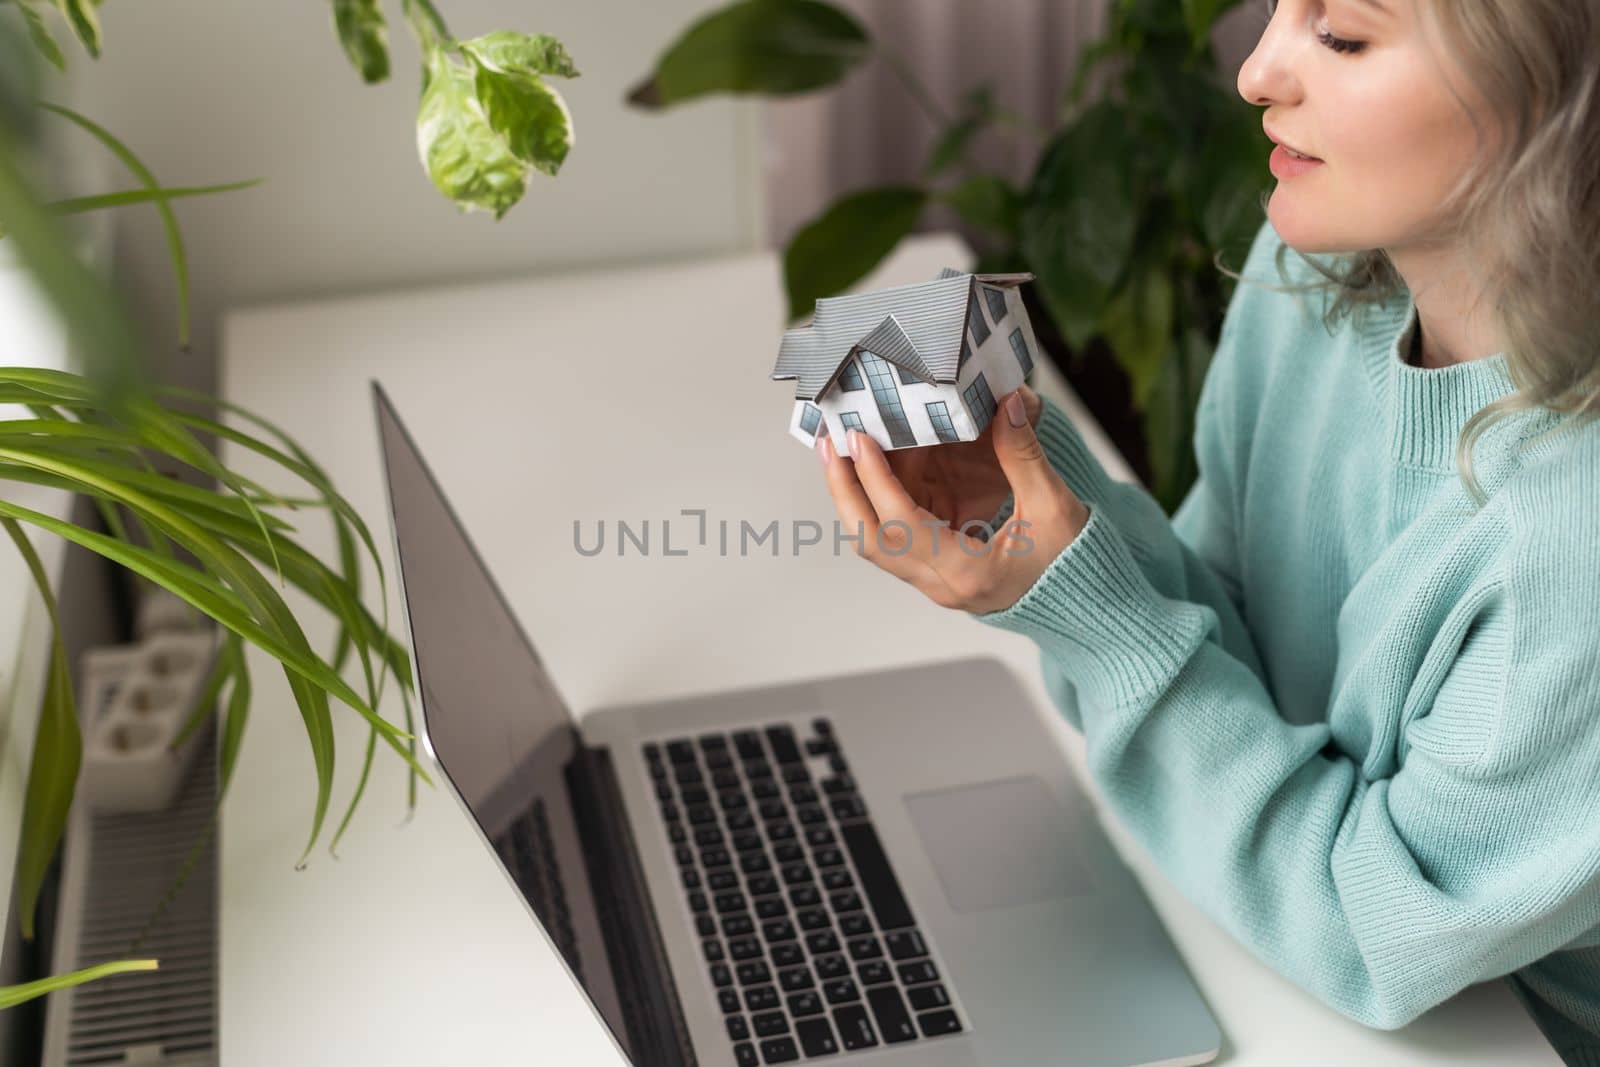 Hands of young woman holding model house, real estate insurance and banking concept